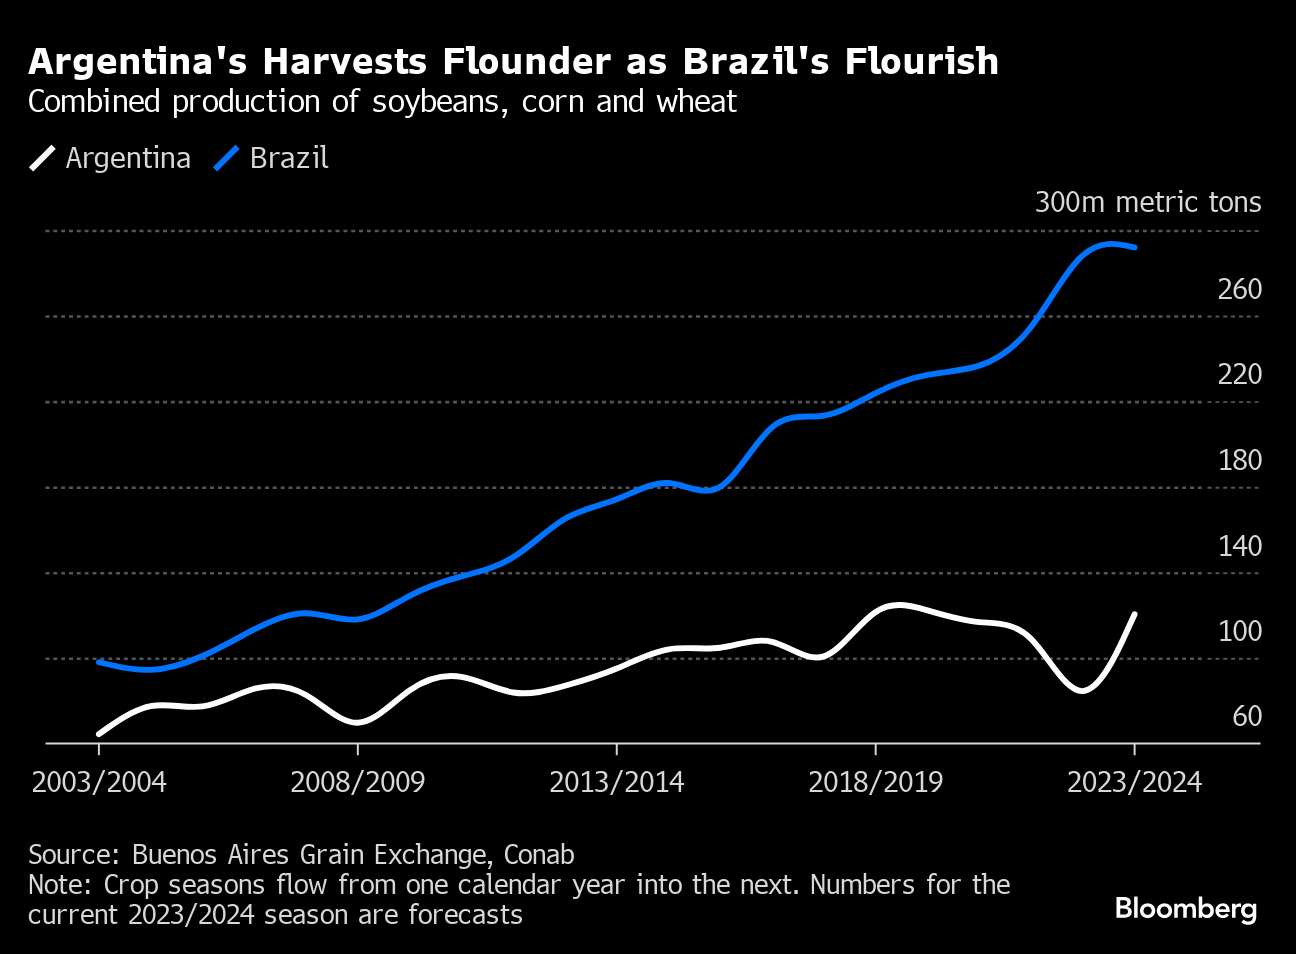 Clarice Couto on LinkedIn: Dry Weather in Key Crop Shipper Brazil